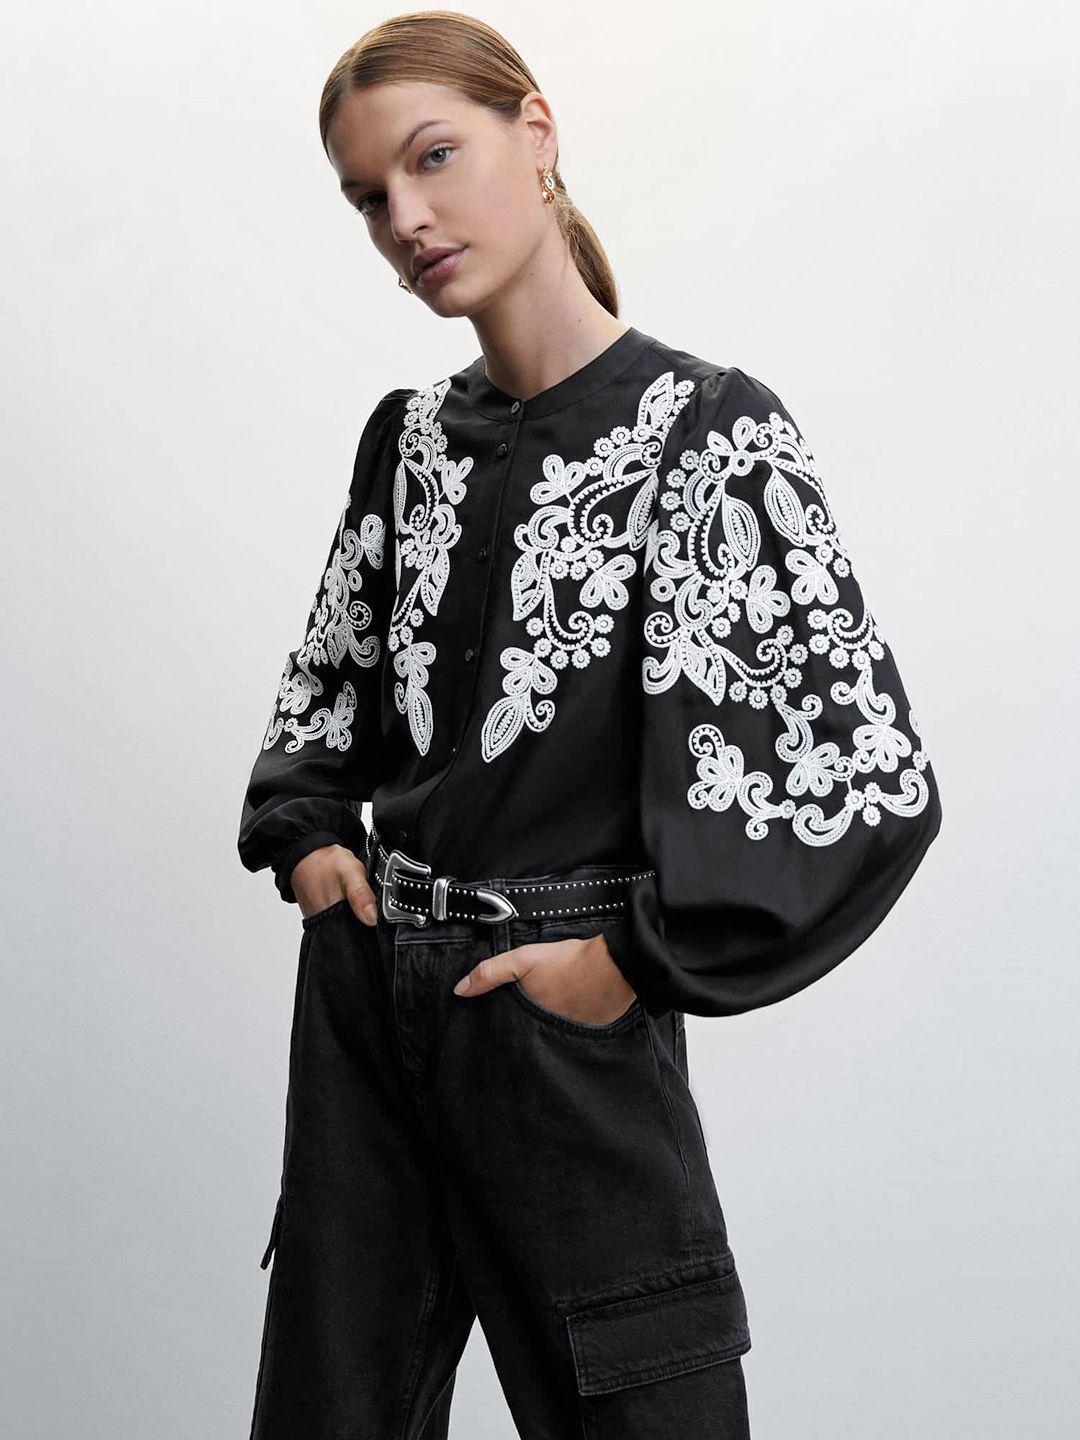 mango floral embroidered monochrome shirt style sustainable top